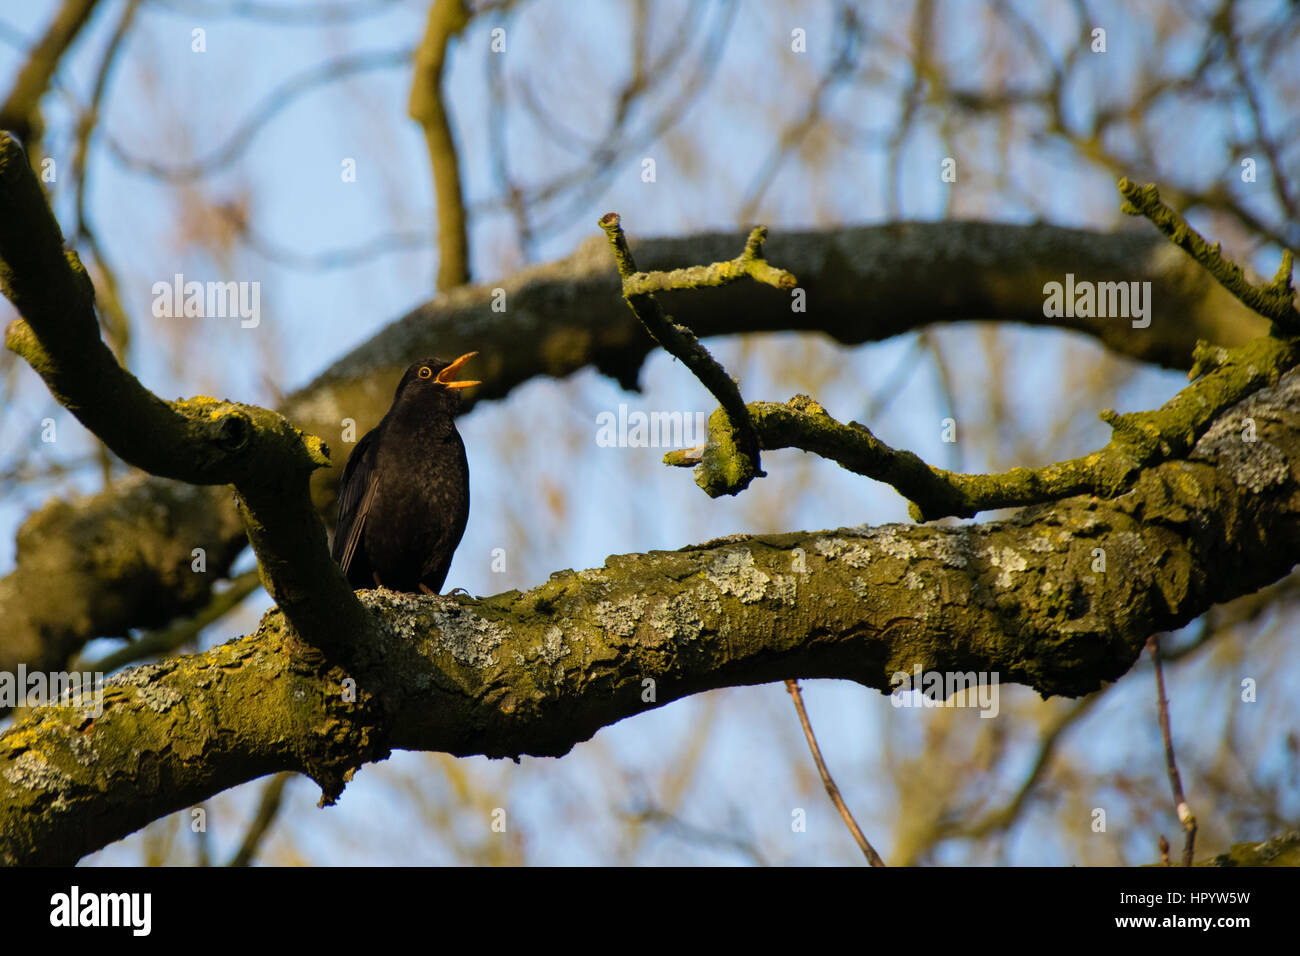 Blackbird perched on lichen covered tree branch in winter singing to female bird Stock Photo